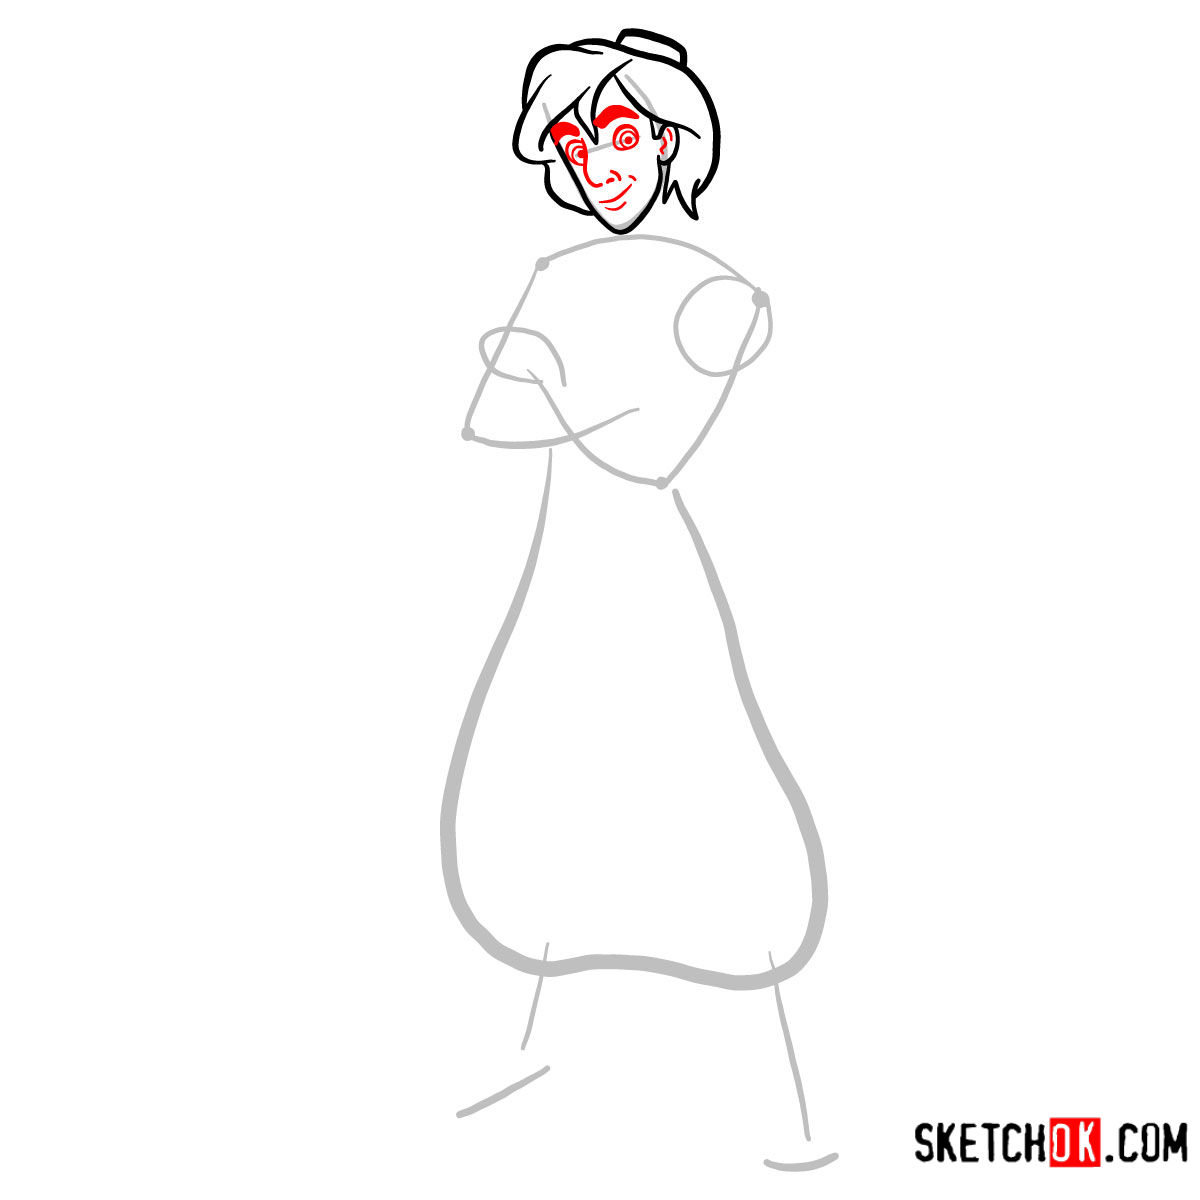 How to draw Aladdin from Disney's animated series - step 04